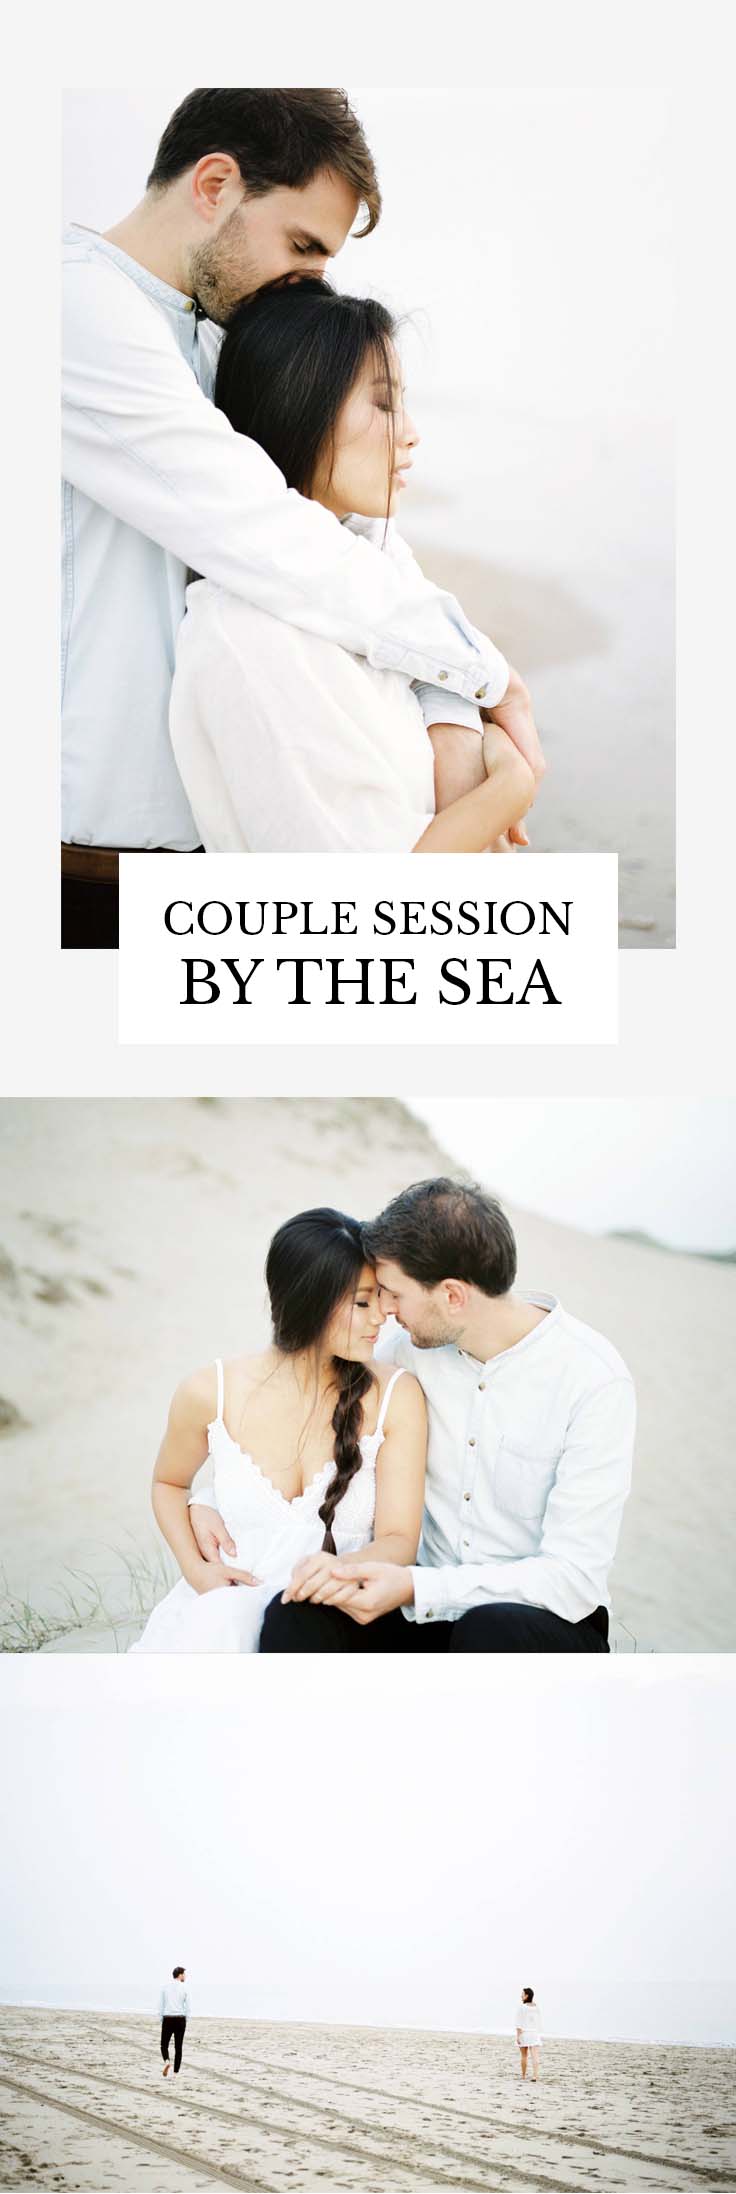 COUPLE SESSION BY THE SEA